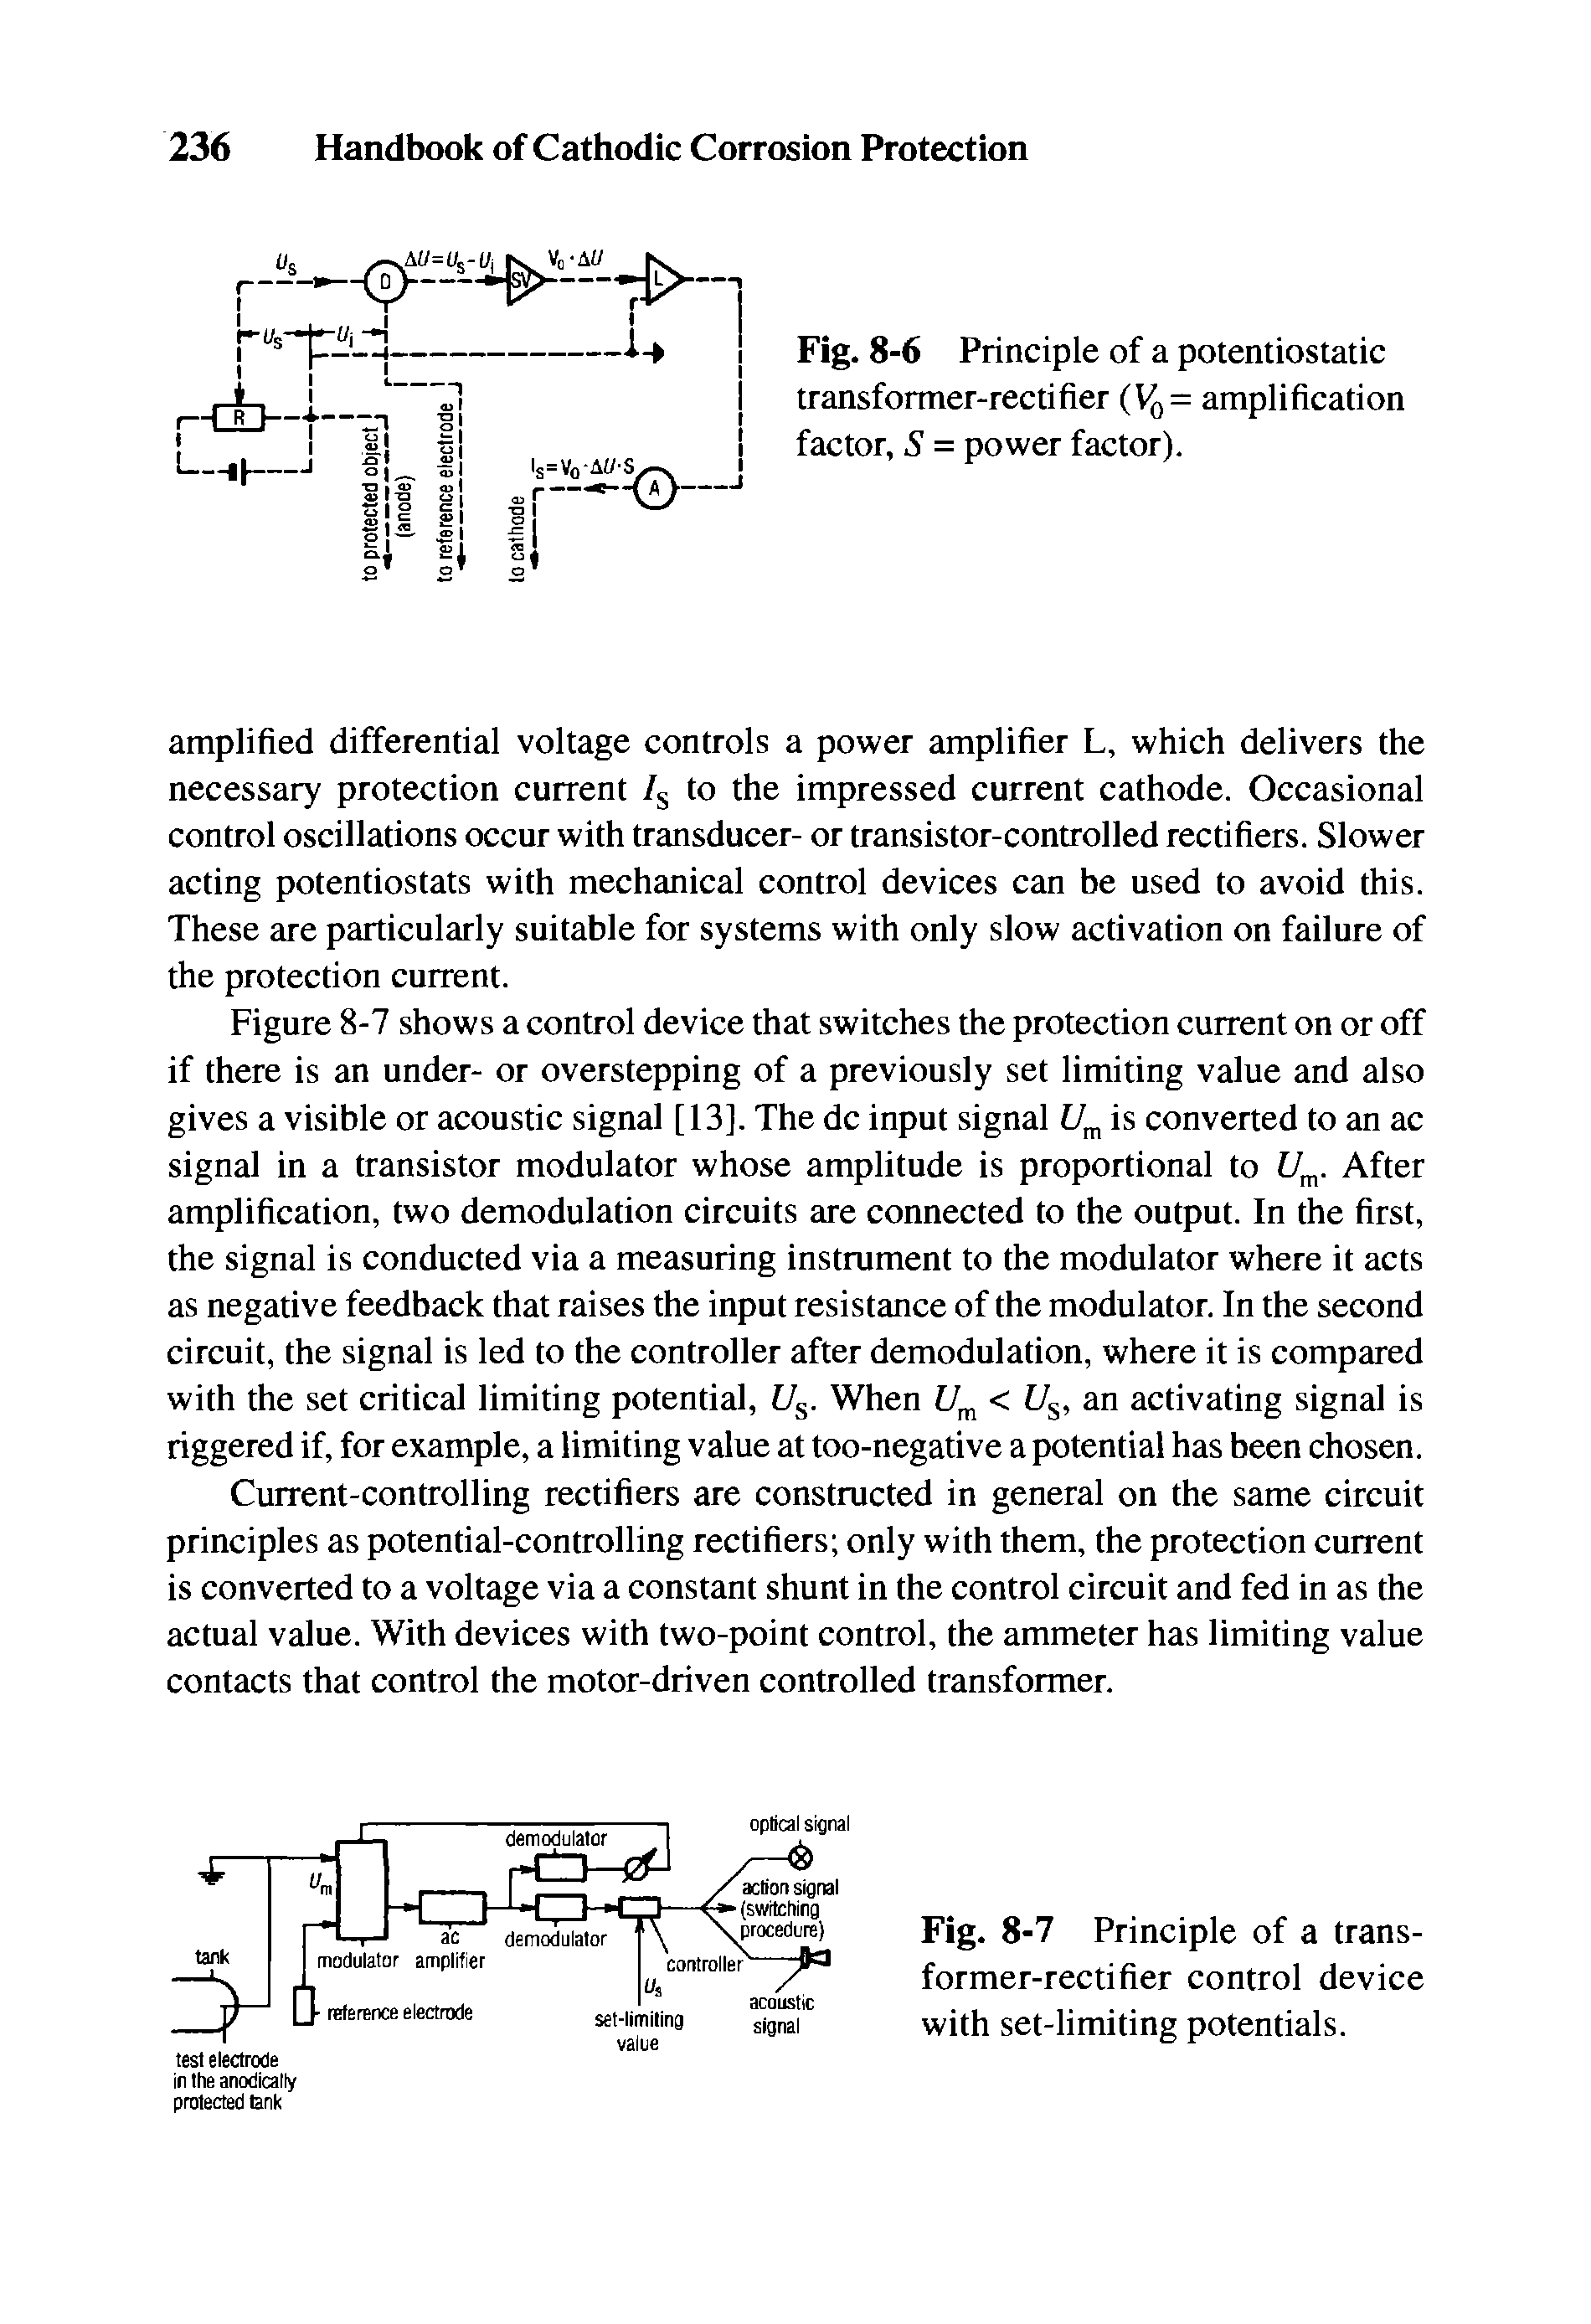 Fig. 8-7 Principle of a transformer-rectifier control device with set-limiting potentials.